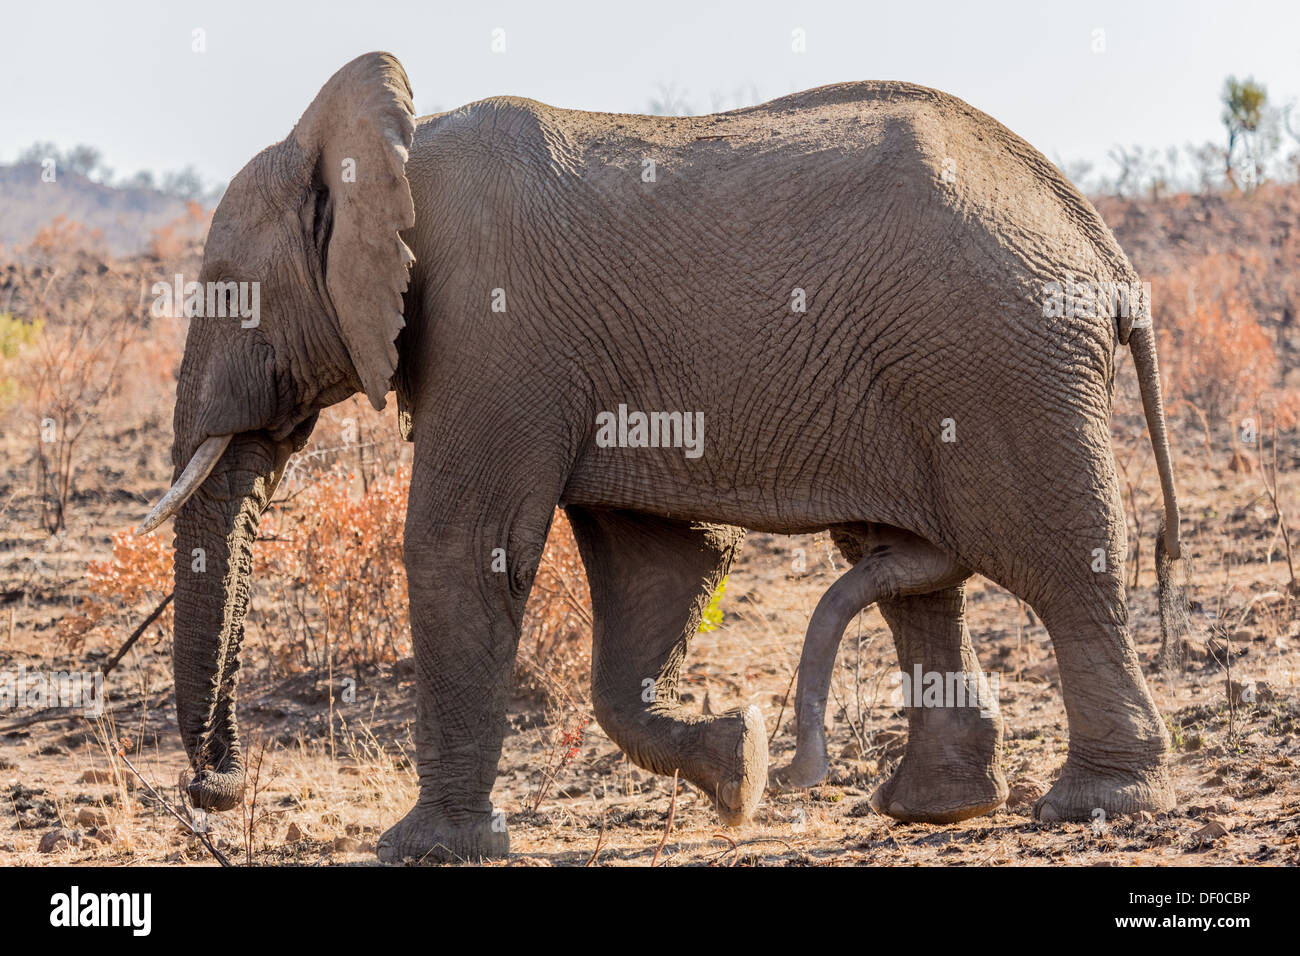 A giant male elephant walking in the grass lands of South Africa's Pilanesberg National Park Stock Photo